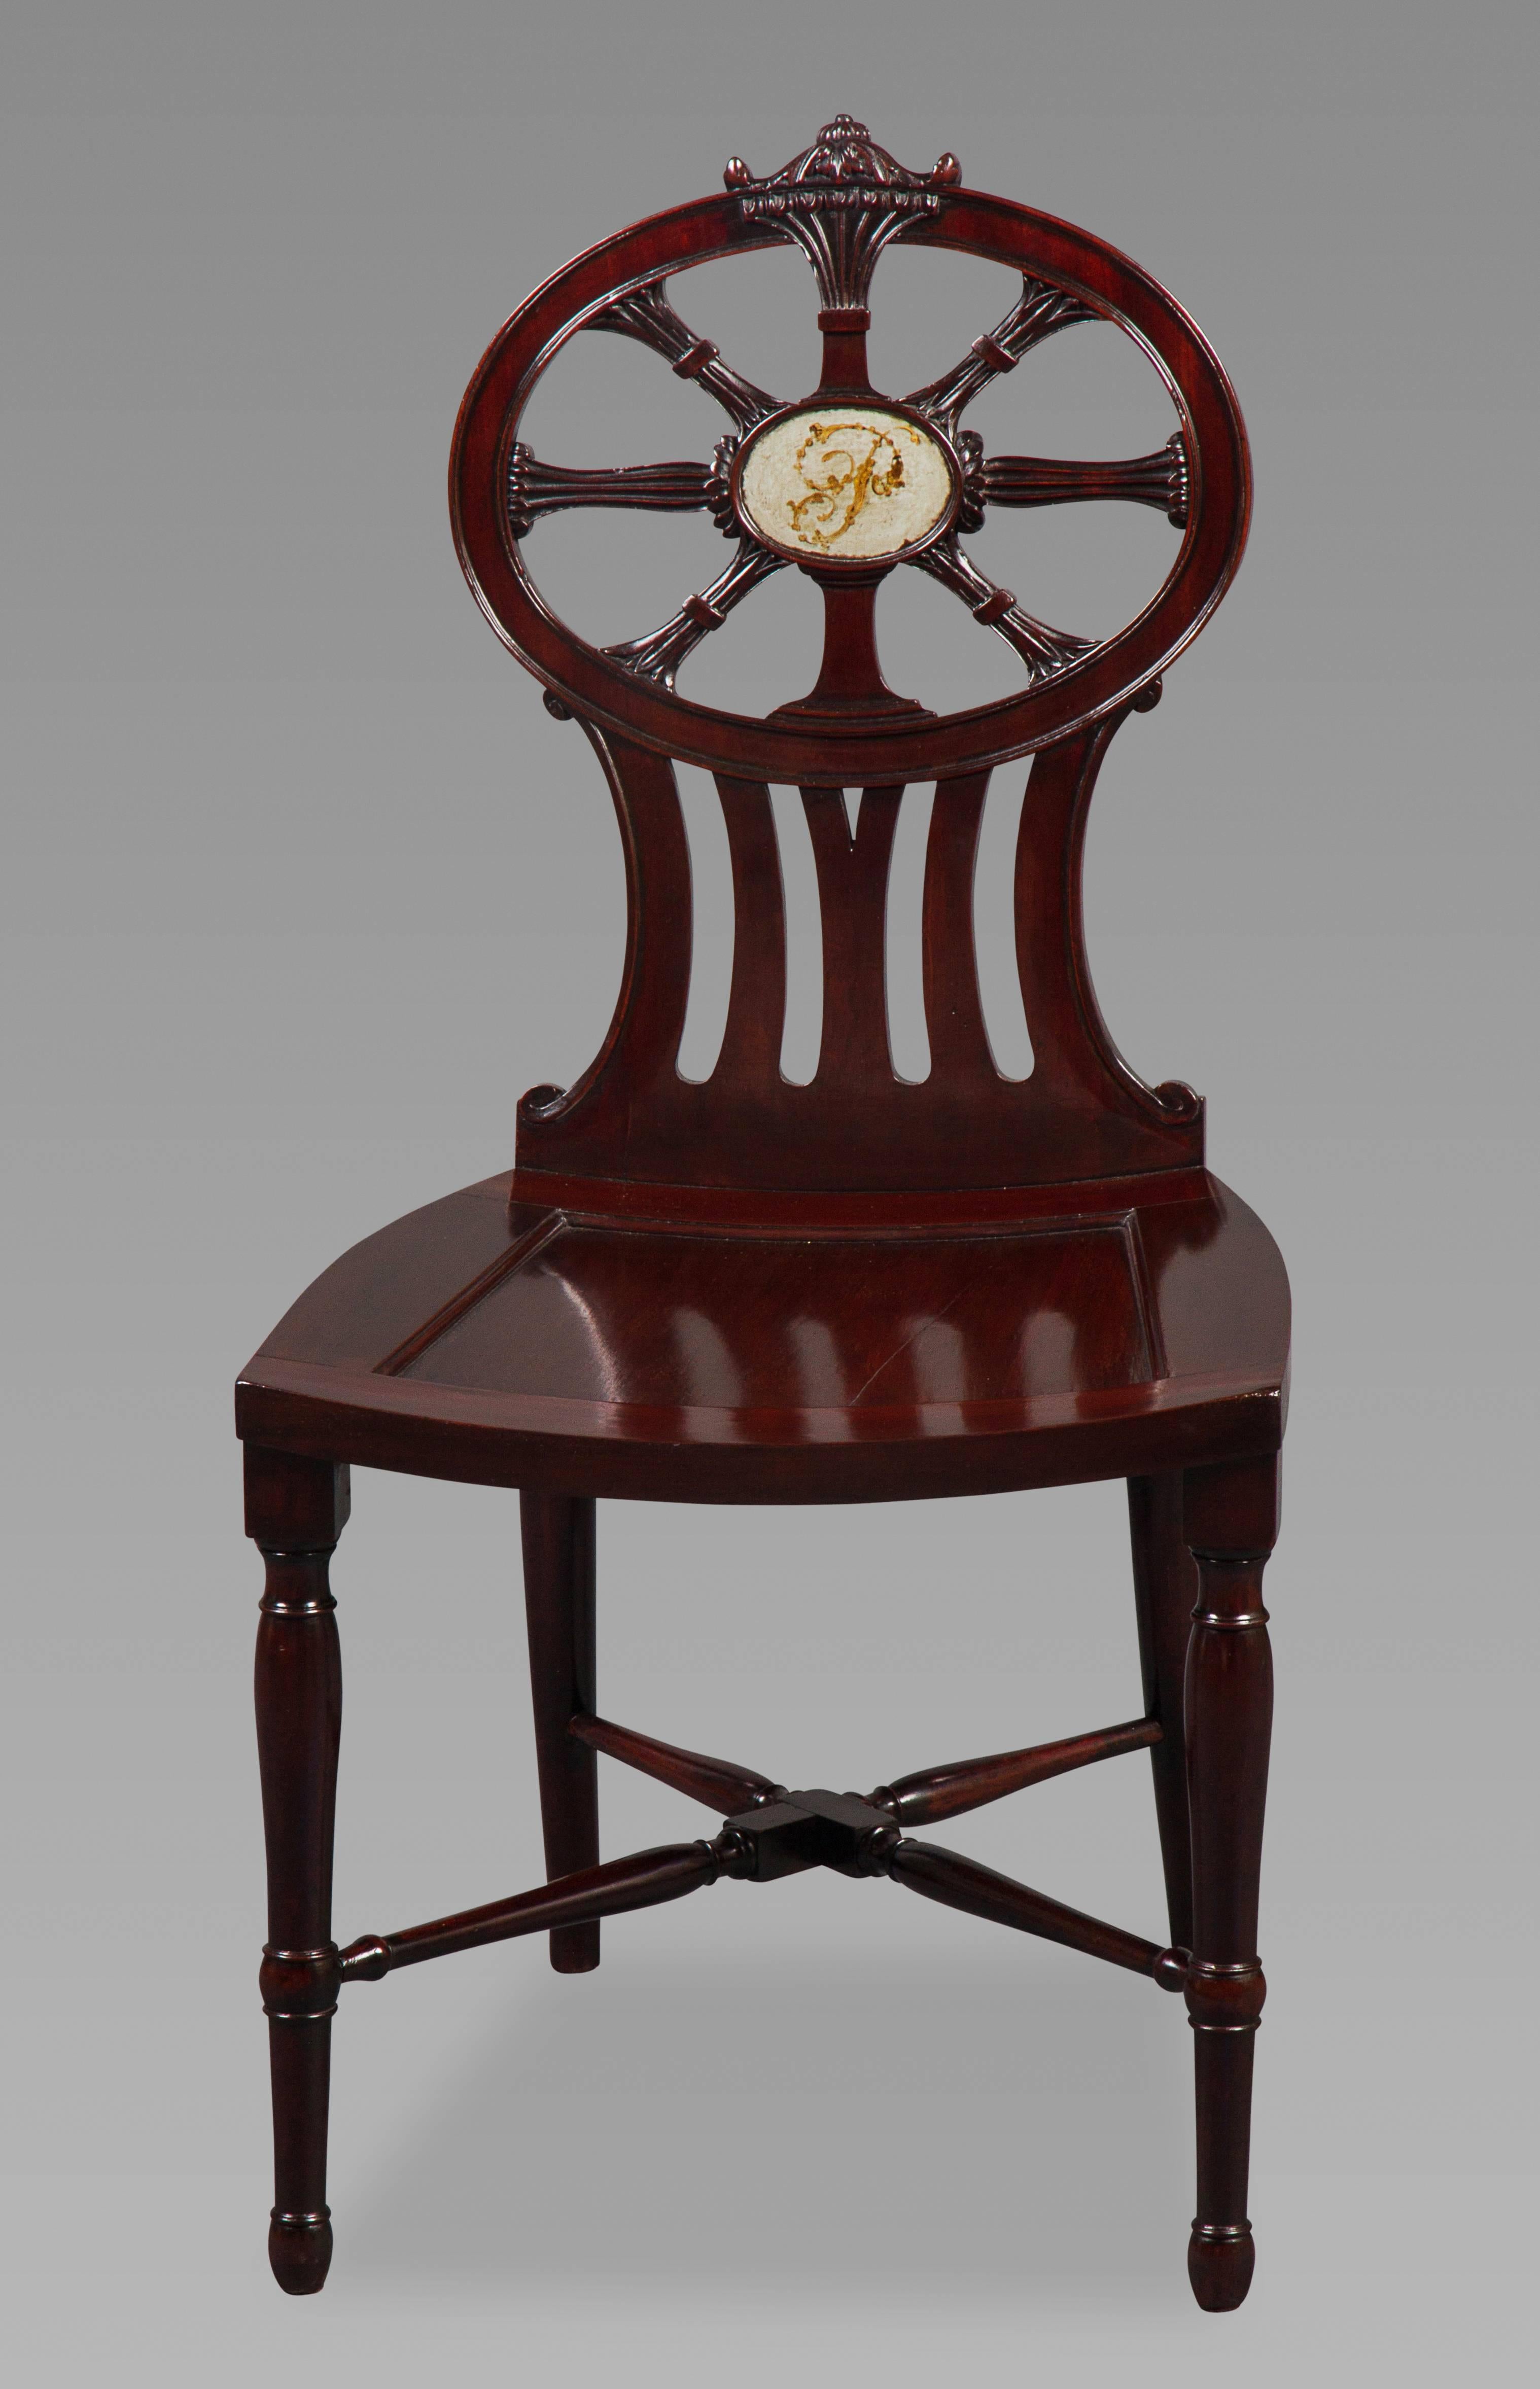 The four chairs of the finest quality mahogany, the backs with an oval six spoked compass design centered by an oval plaque painted with a floral 